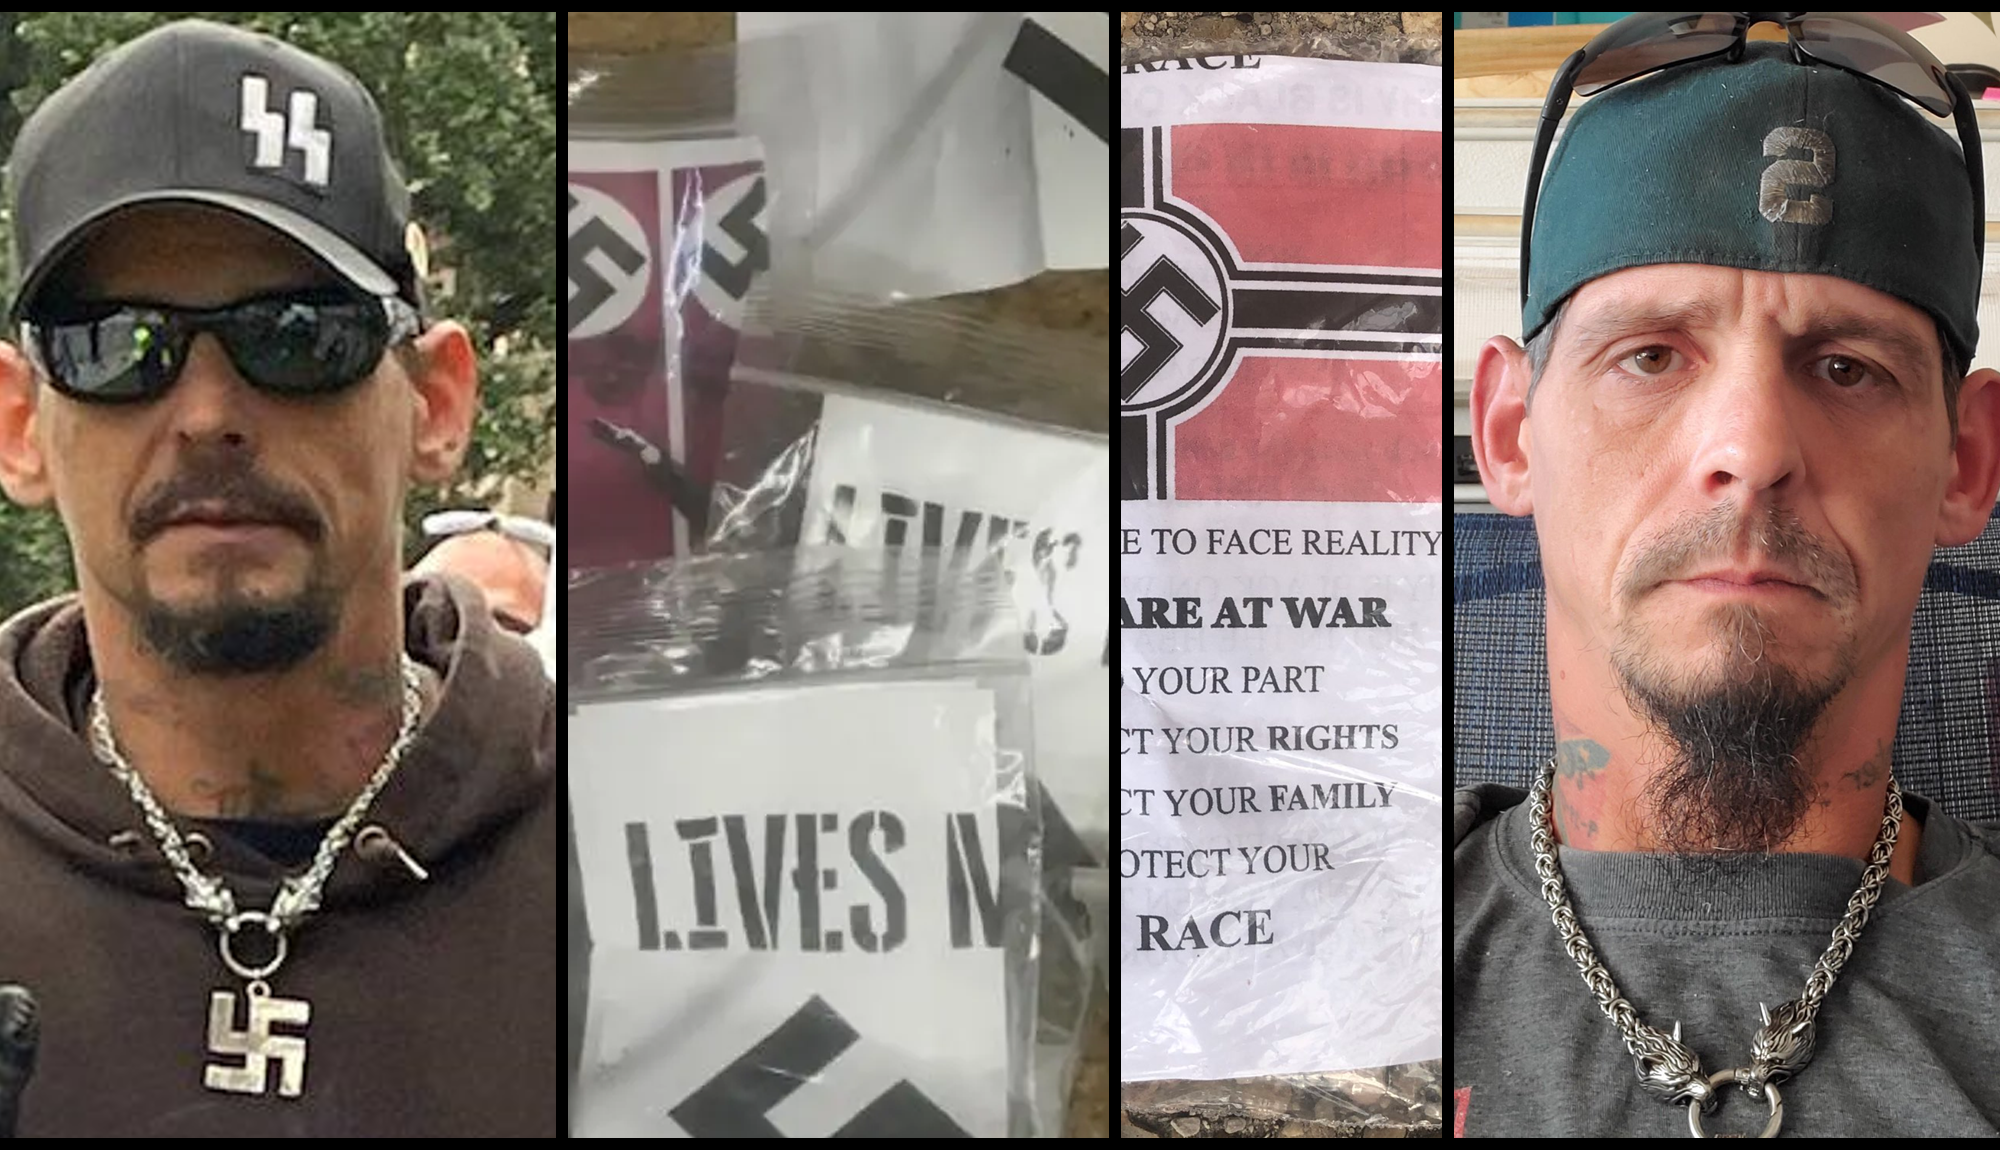 Header image of Ronald Murray and his Nazi flyers